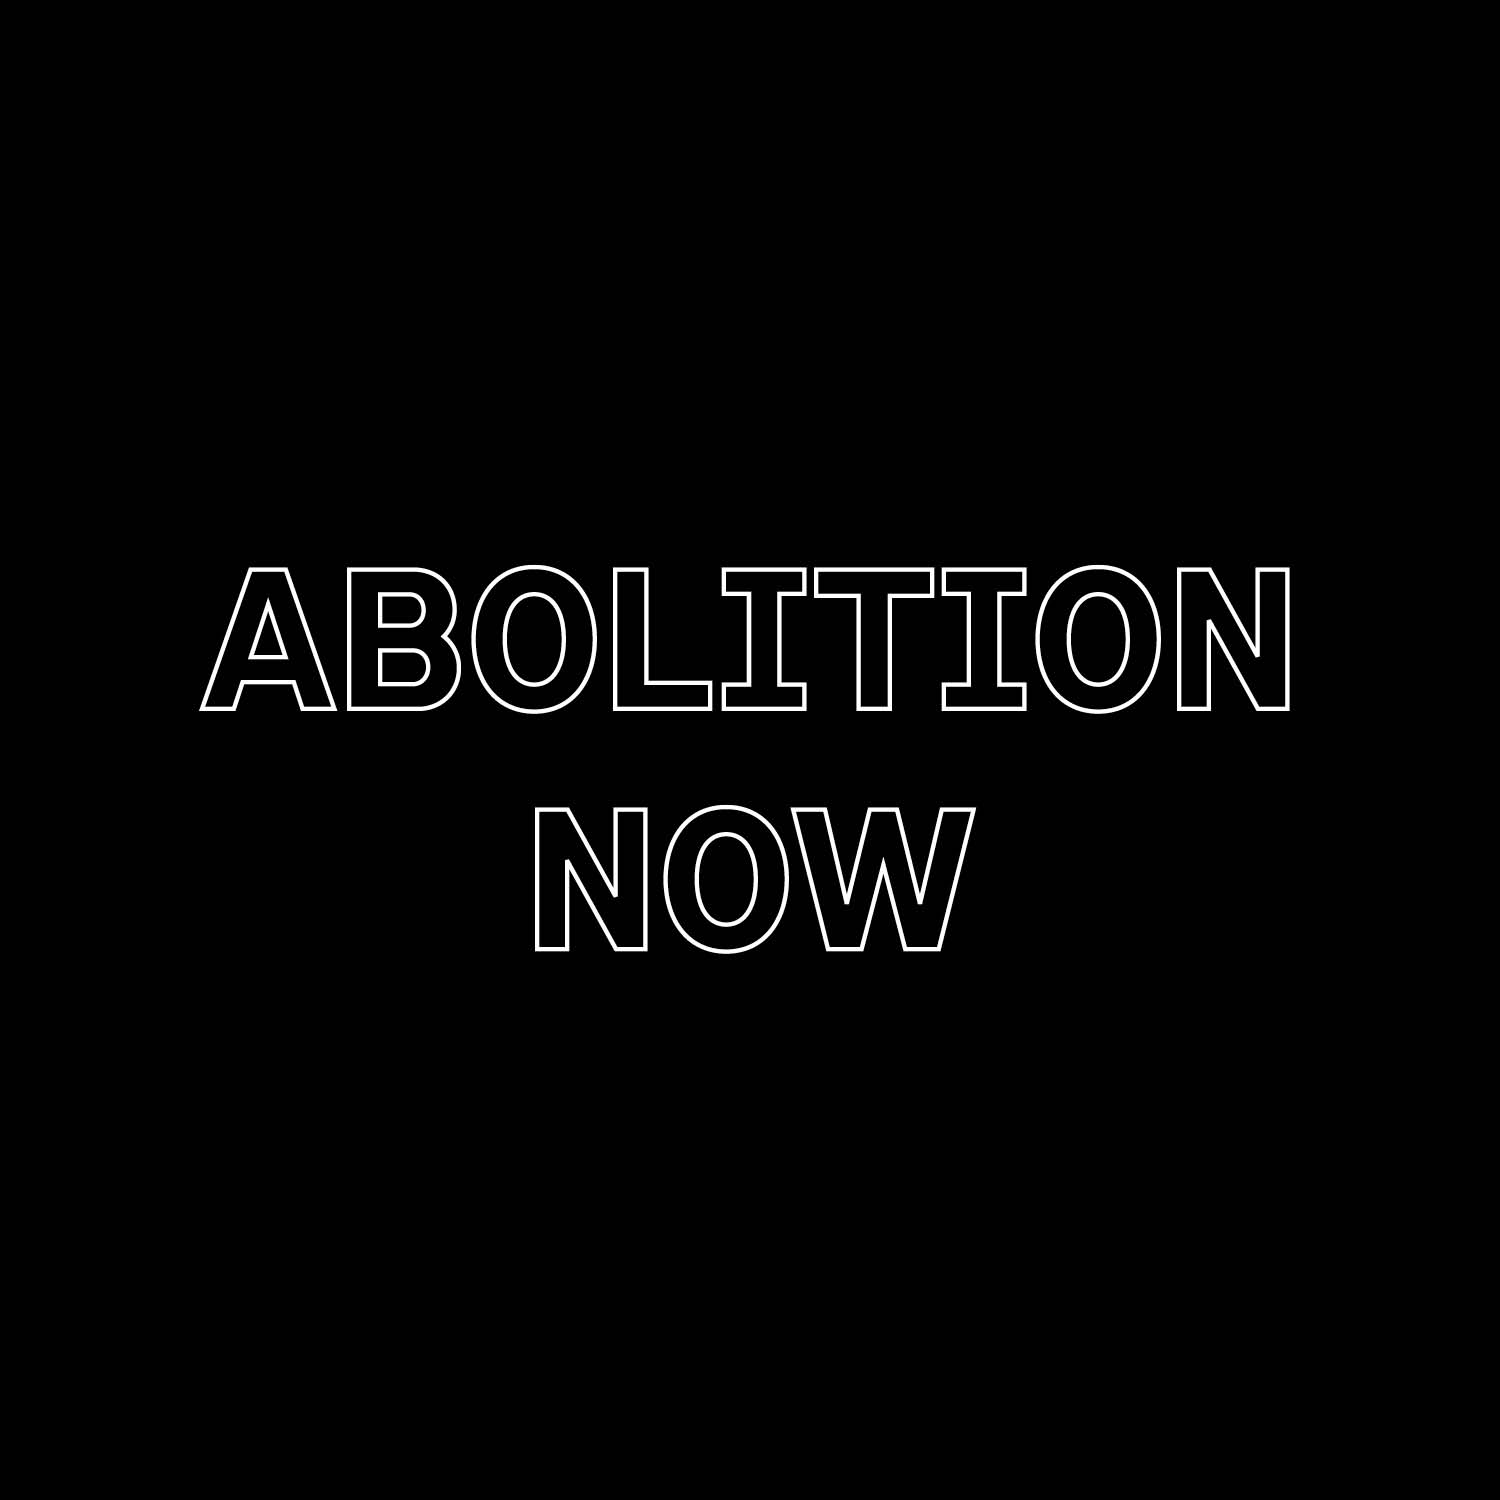 Abolition Now